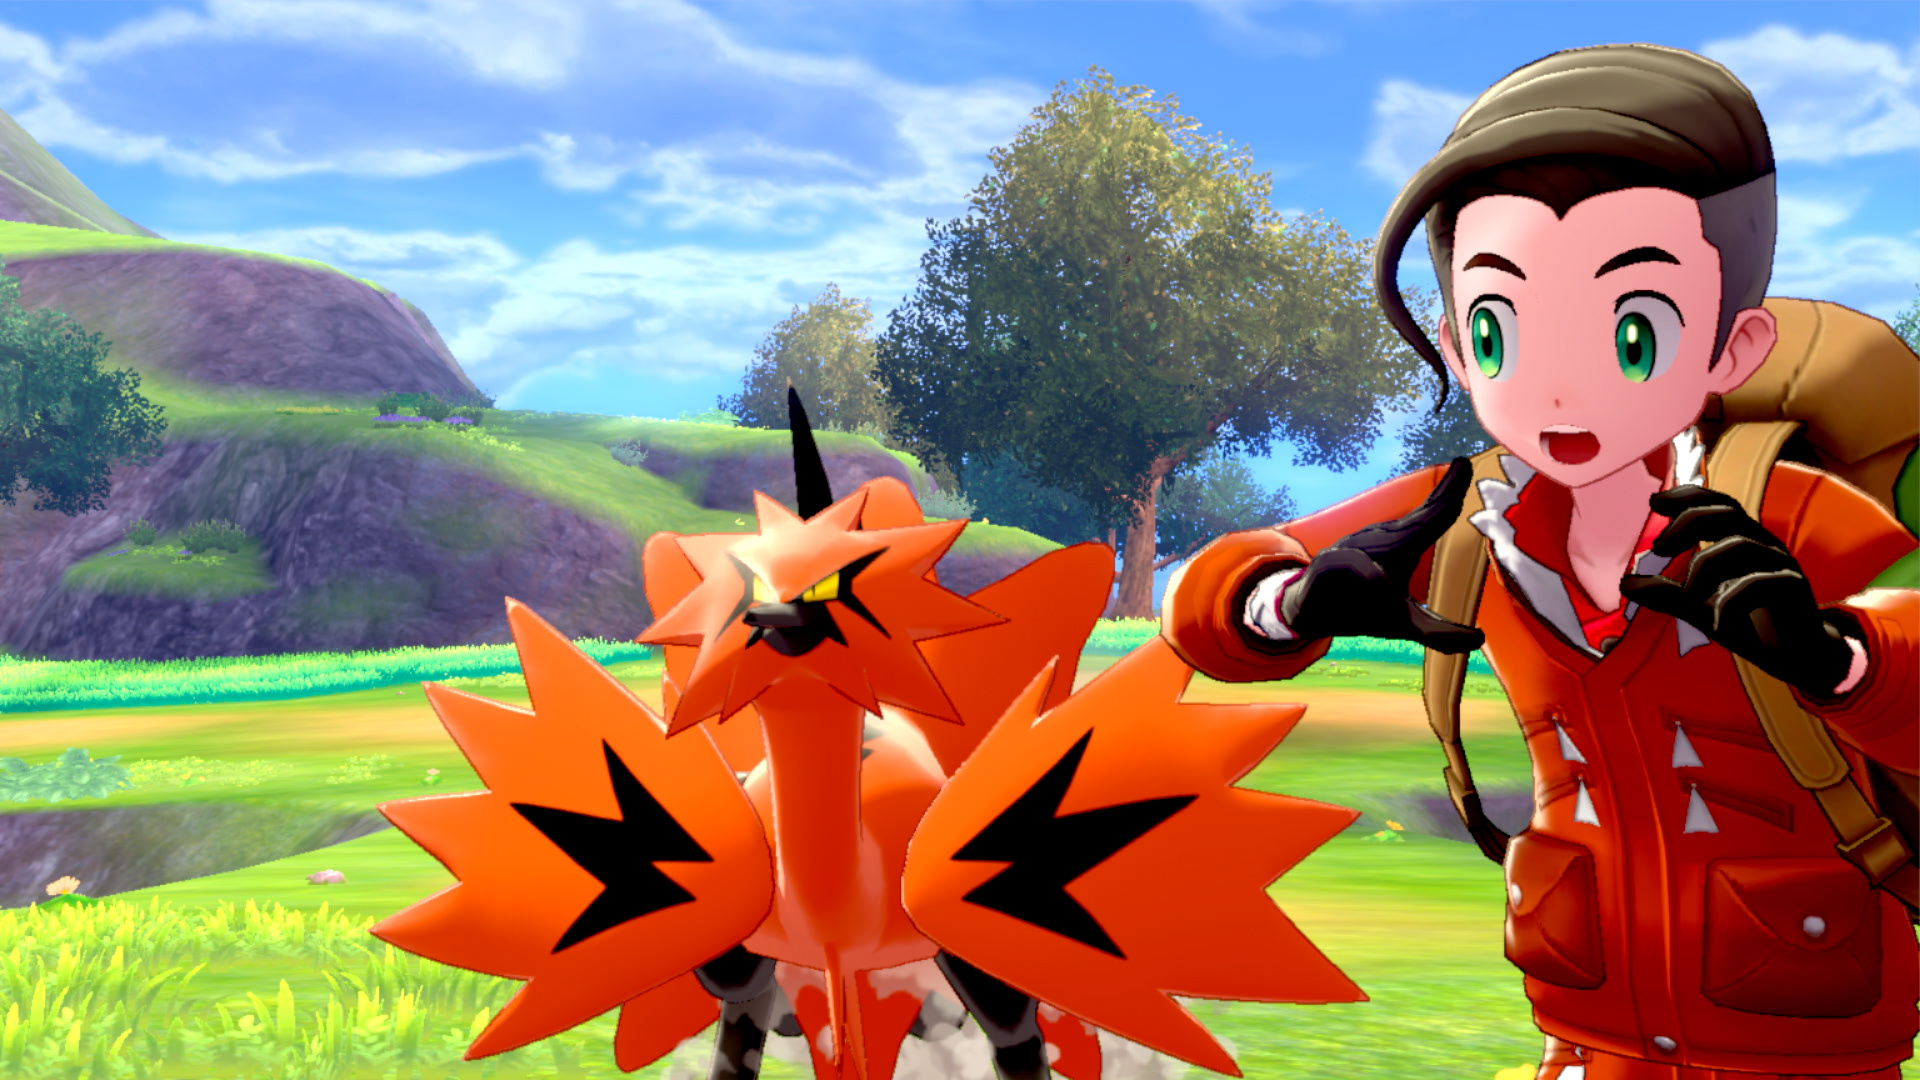 Pokémon Sword and Shield: The Crown Tundra review - that's more